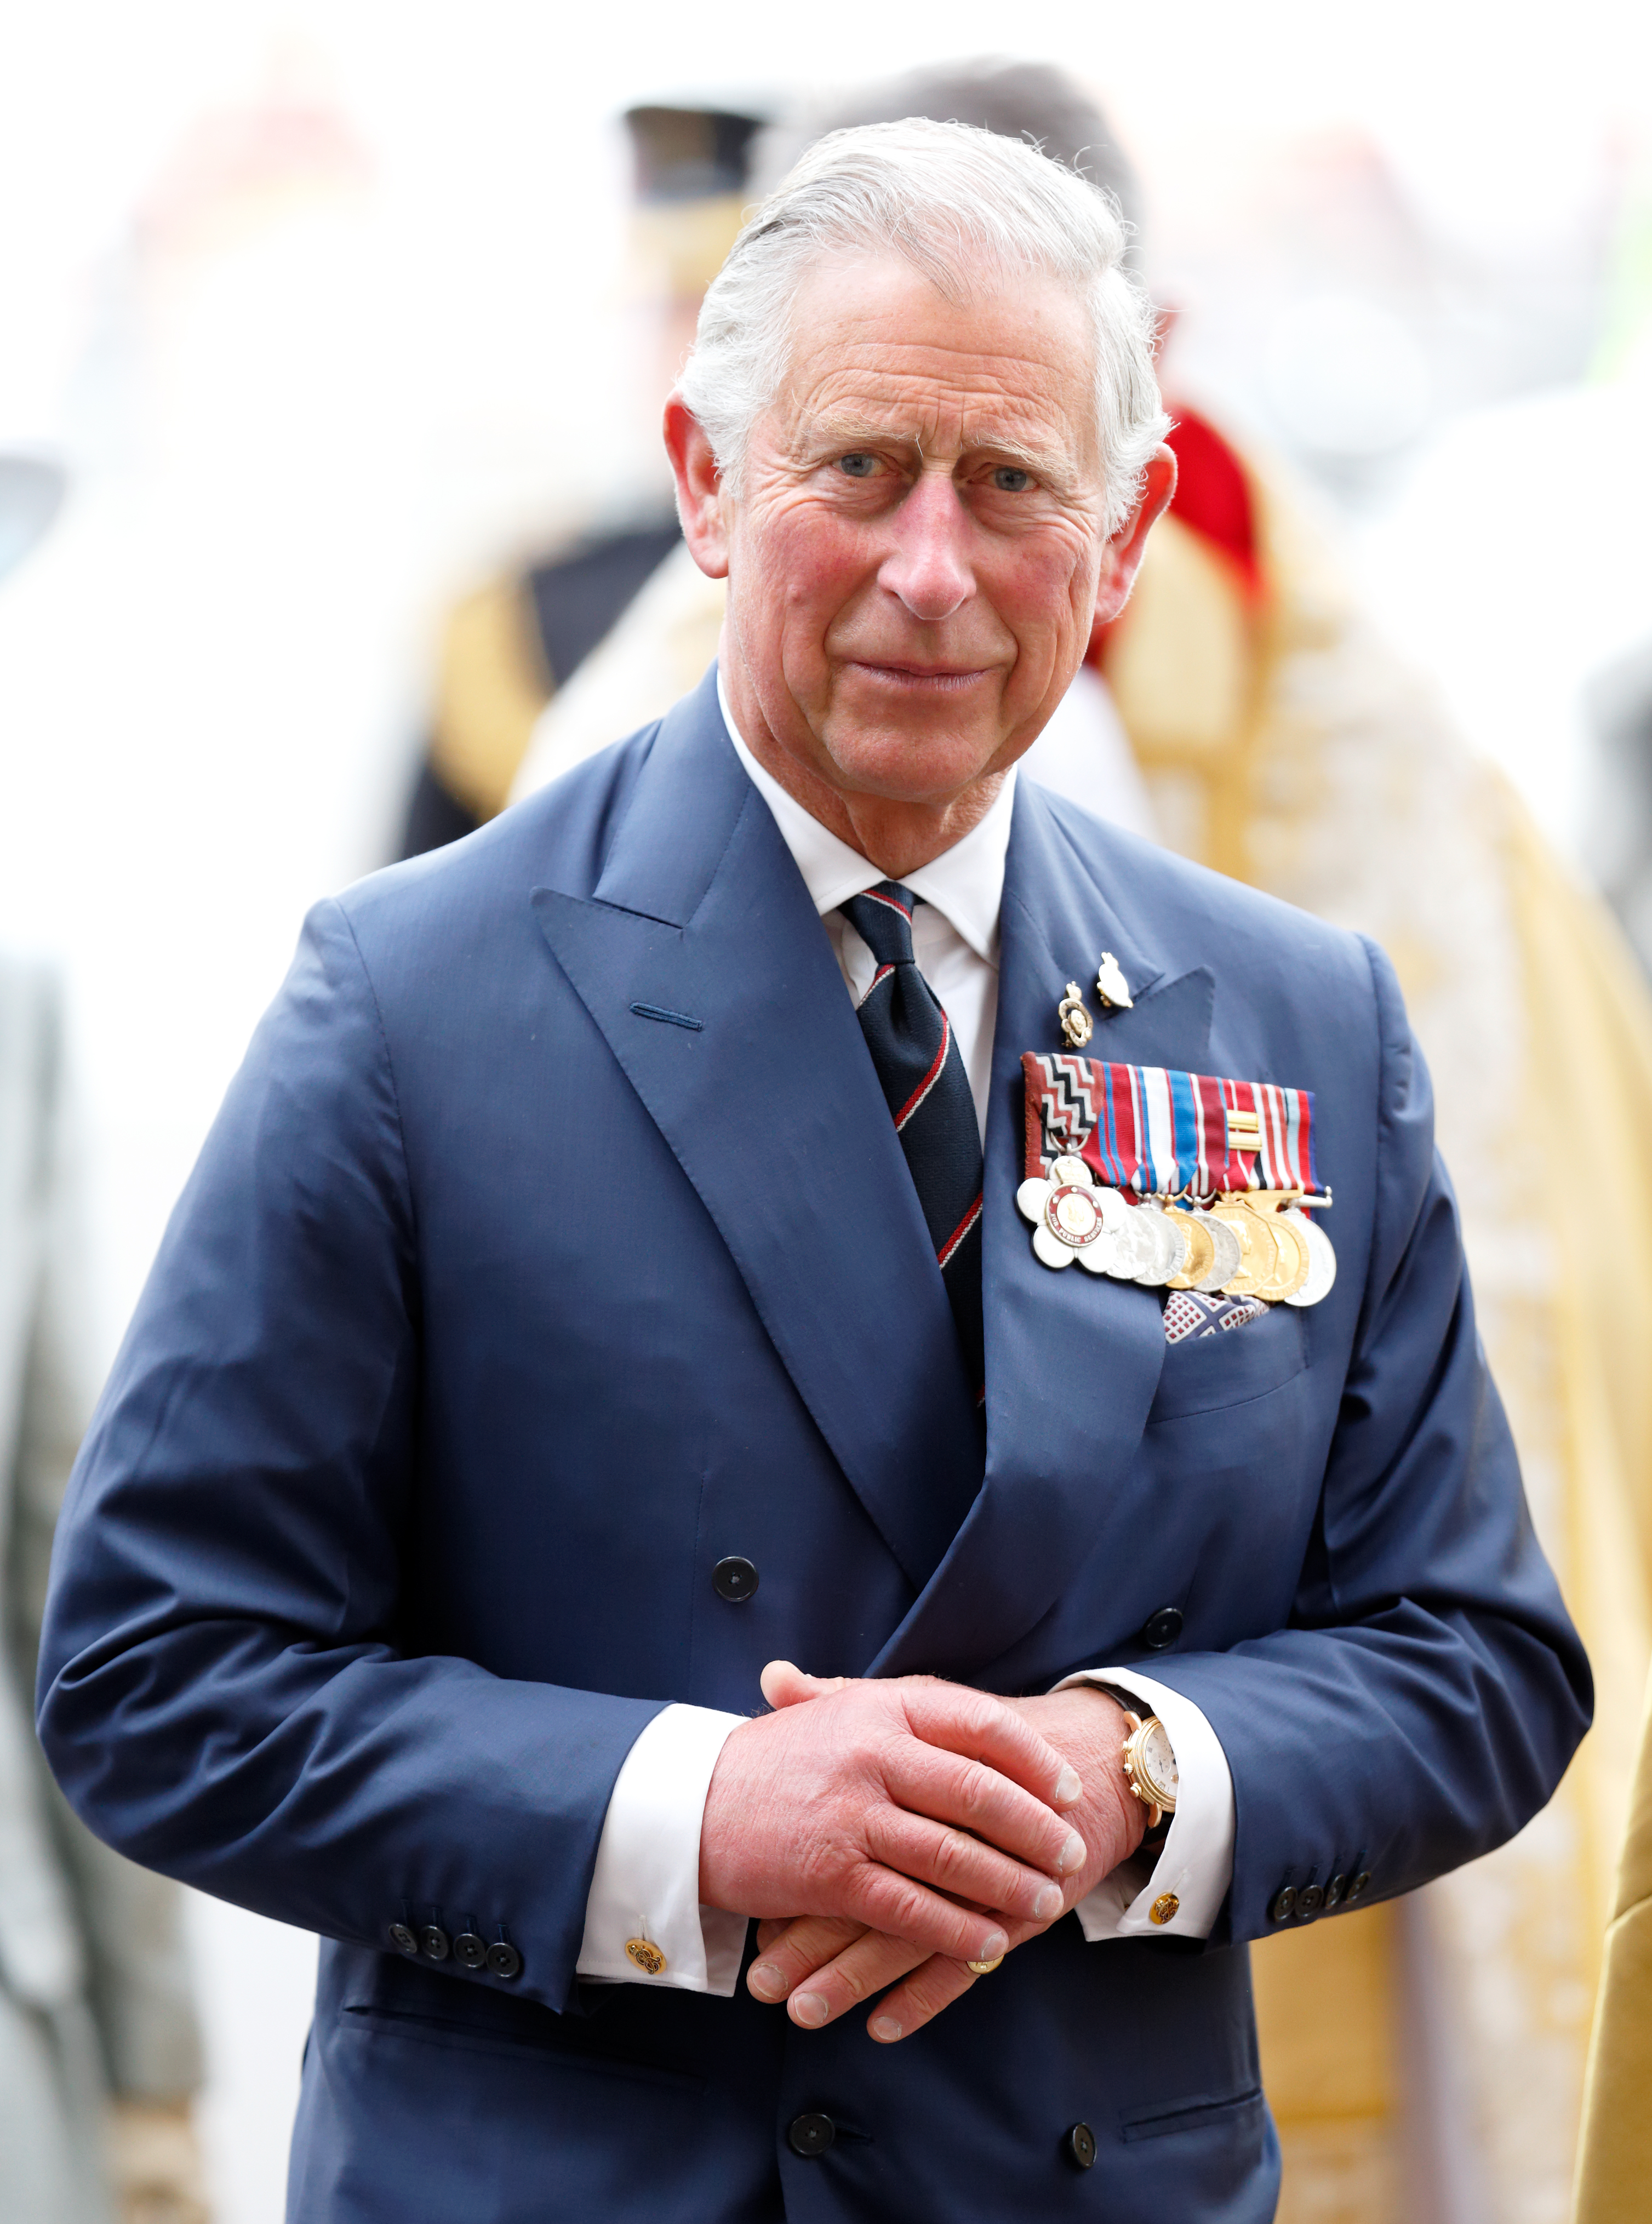 Prince Charles, Prince of Wales, at a Service of Thanksgiving to mark the 70th Anniversary of VE Day at Westminster Abbey in London, England, on May 10, 2015. | Source: Getty Images